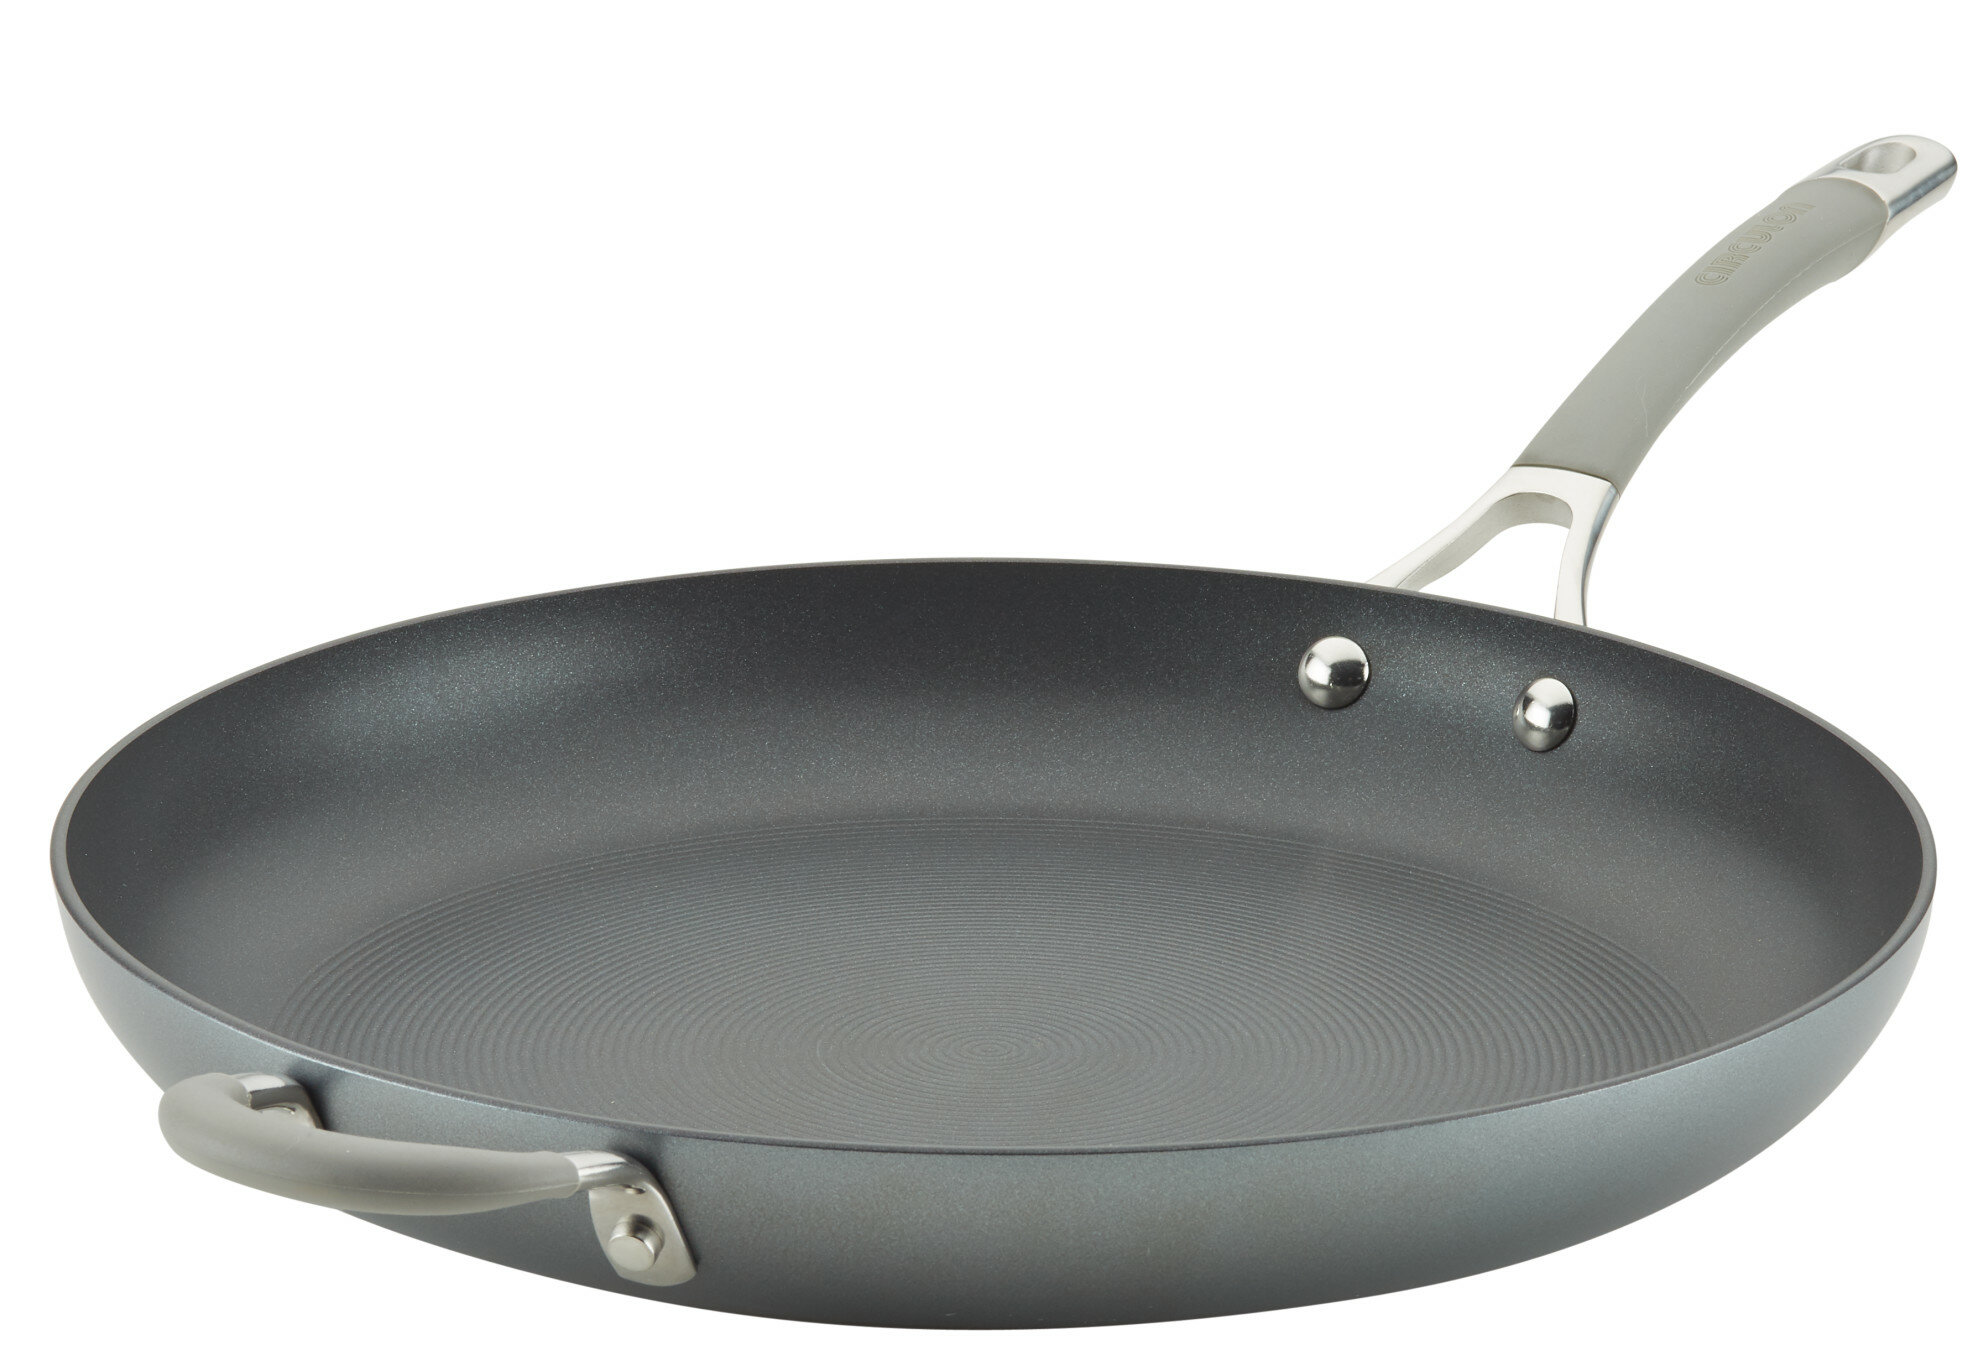 8.5" Details about   Advanced Hard Anodized Nonstick Frying Pan/ Fry Pan/Hard Anodized Skillet 